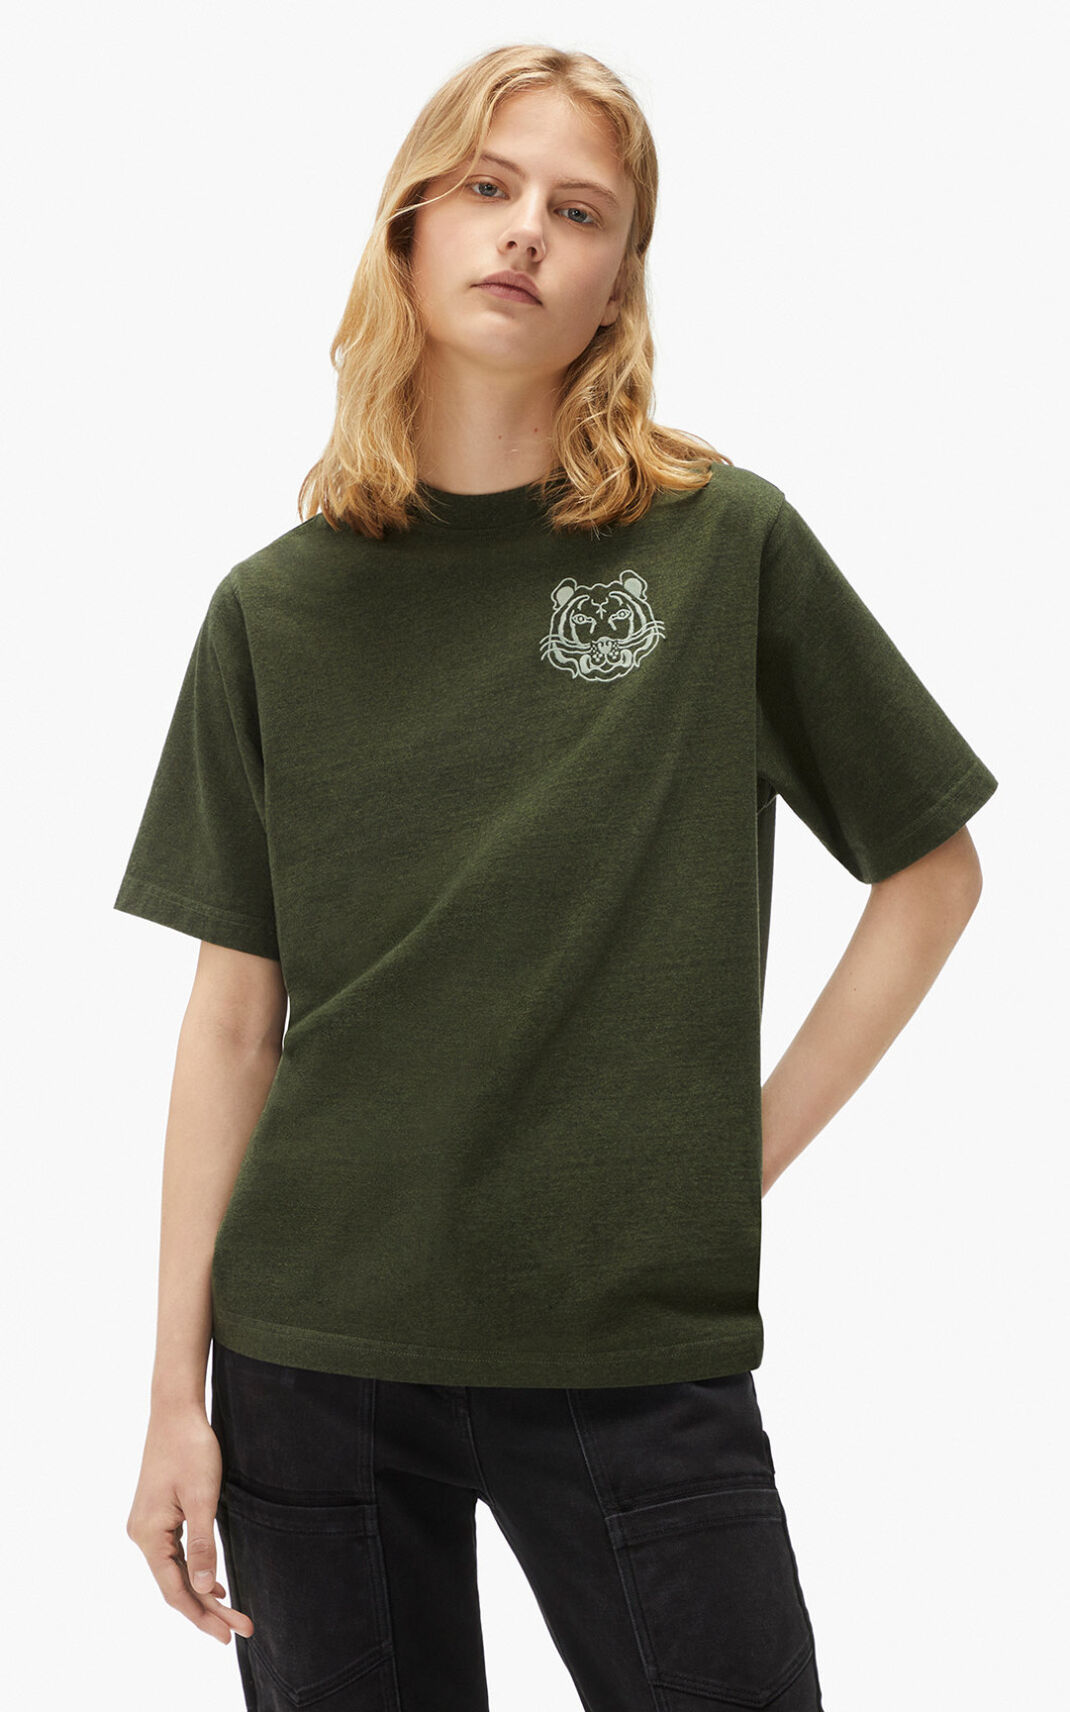 Kenzo RE/relaxed casual Tシャツ レディース オリーブ - ZFNQWE917